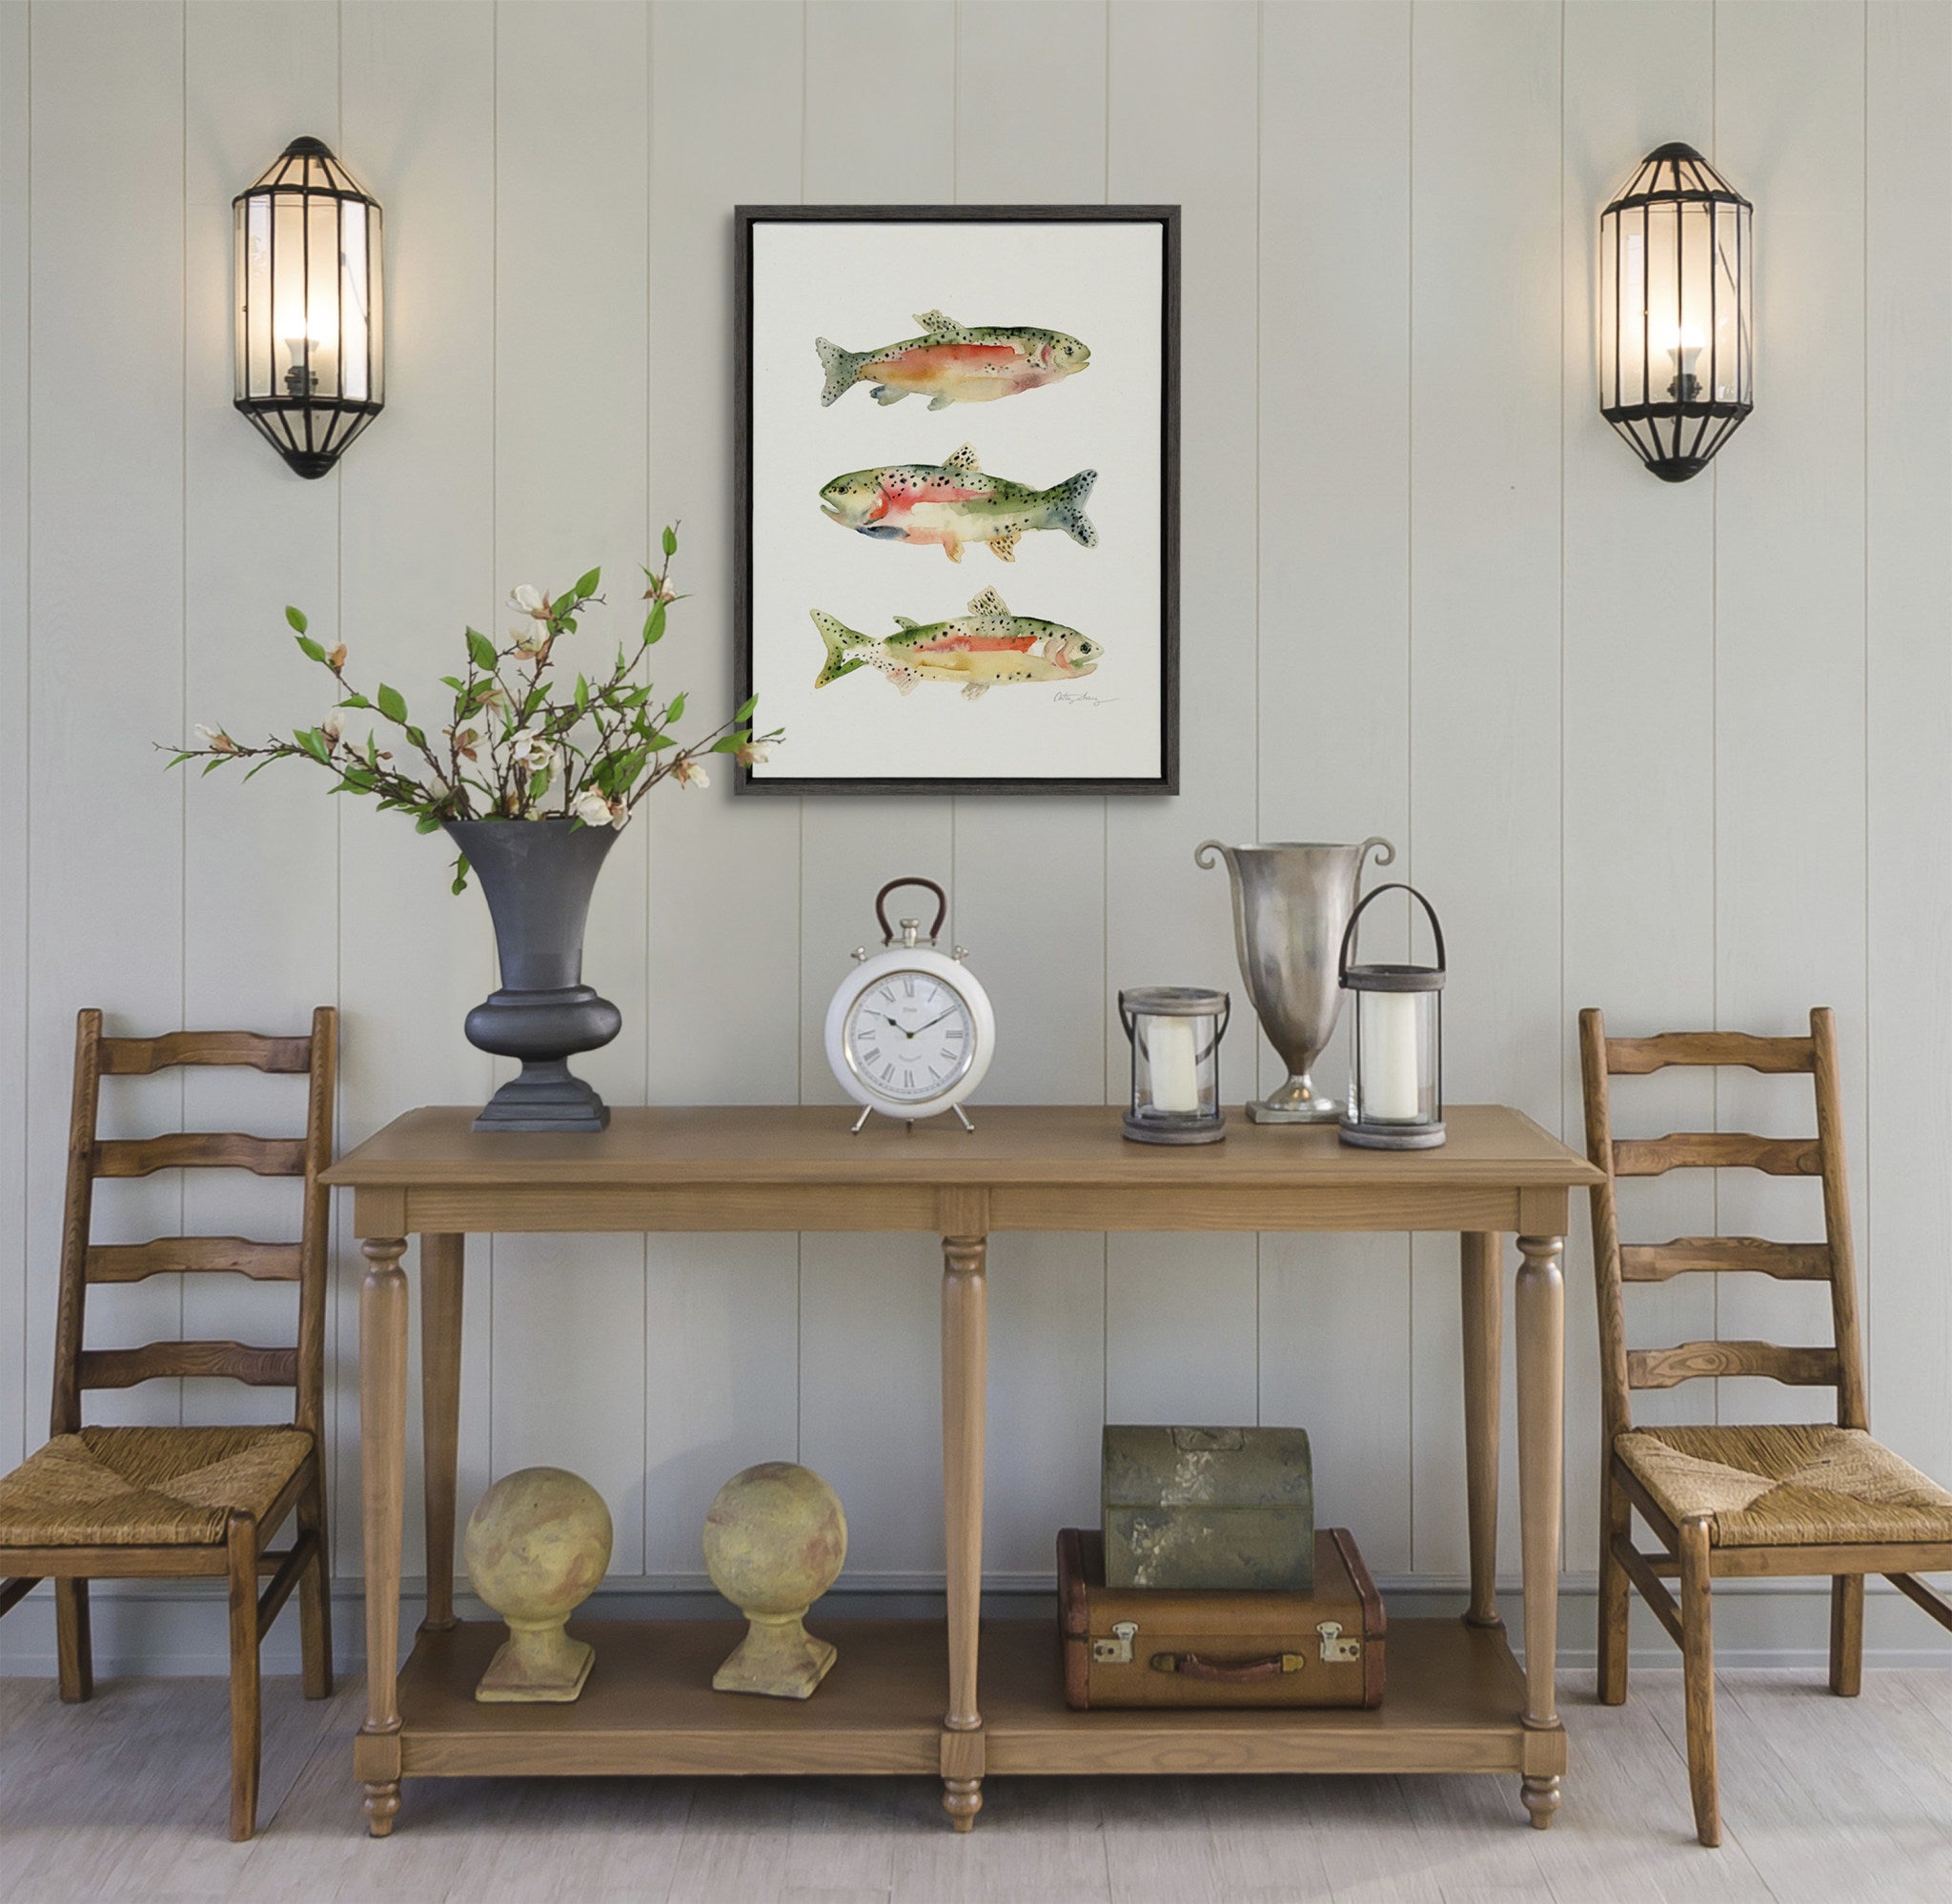 Sylvie Rainbow Trout Framed Canvas by Cathy Zhang